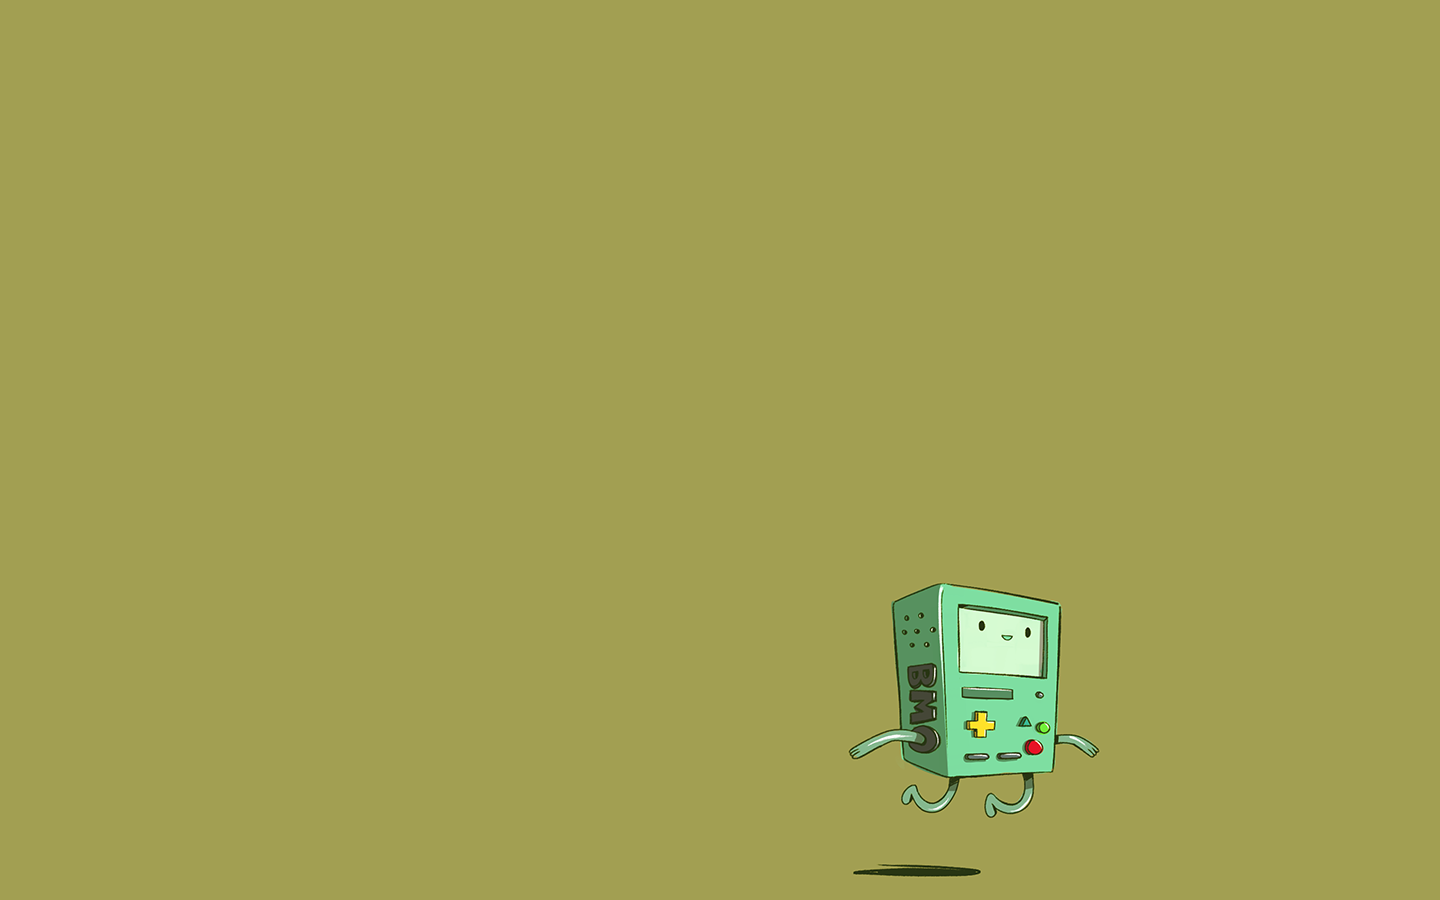 Just 3 Adventure Time Wallpapers I made out of peoples art